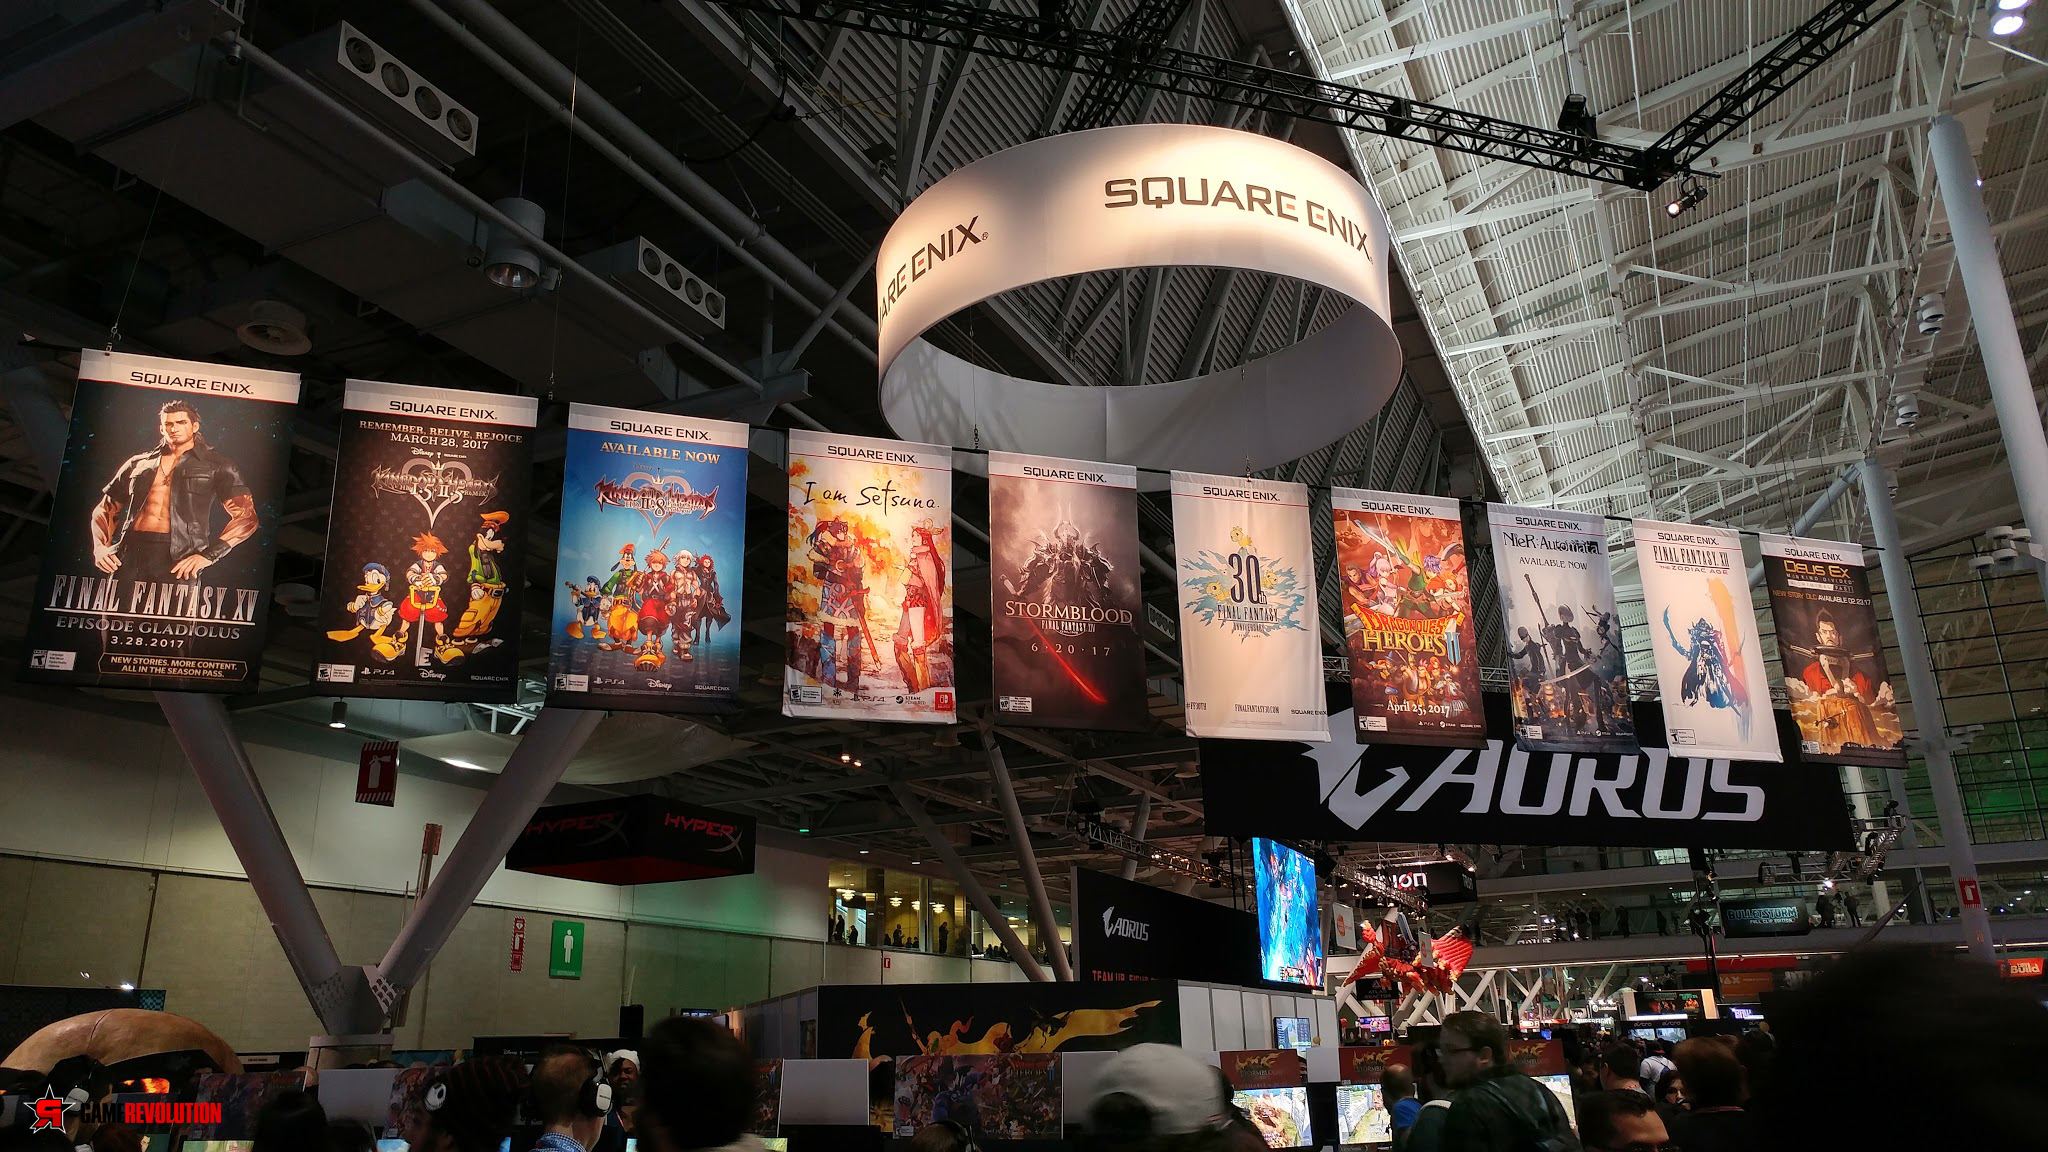 PAX East 2017 Gallery: Booths, Games, And Cosplay From The Show Floor #2